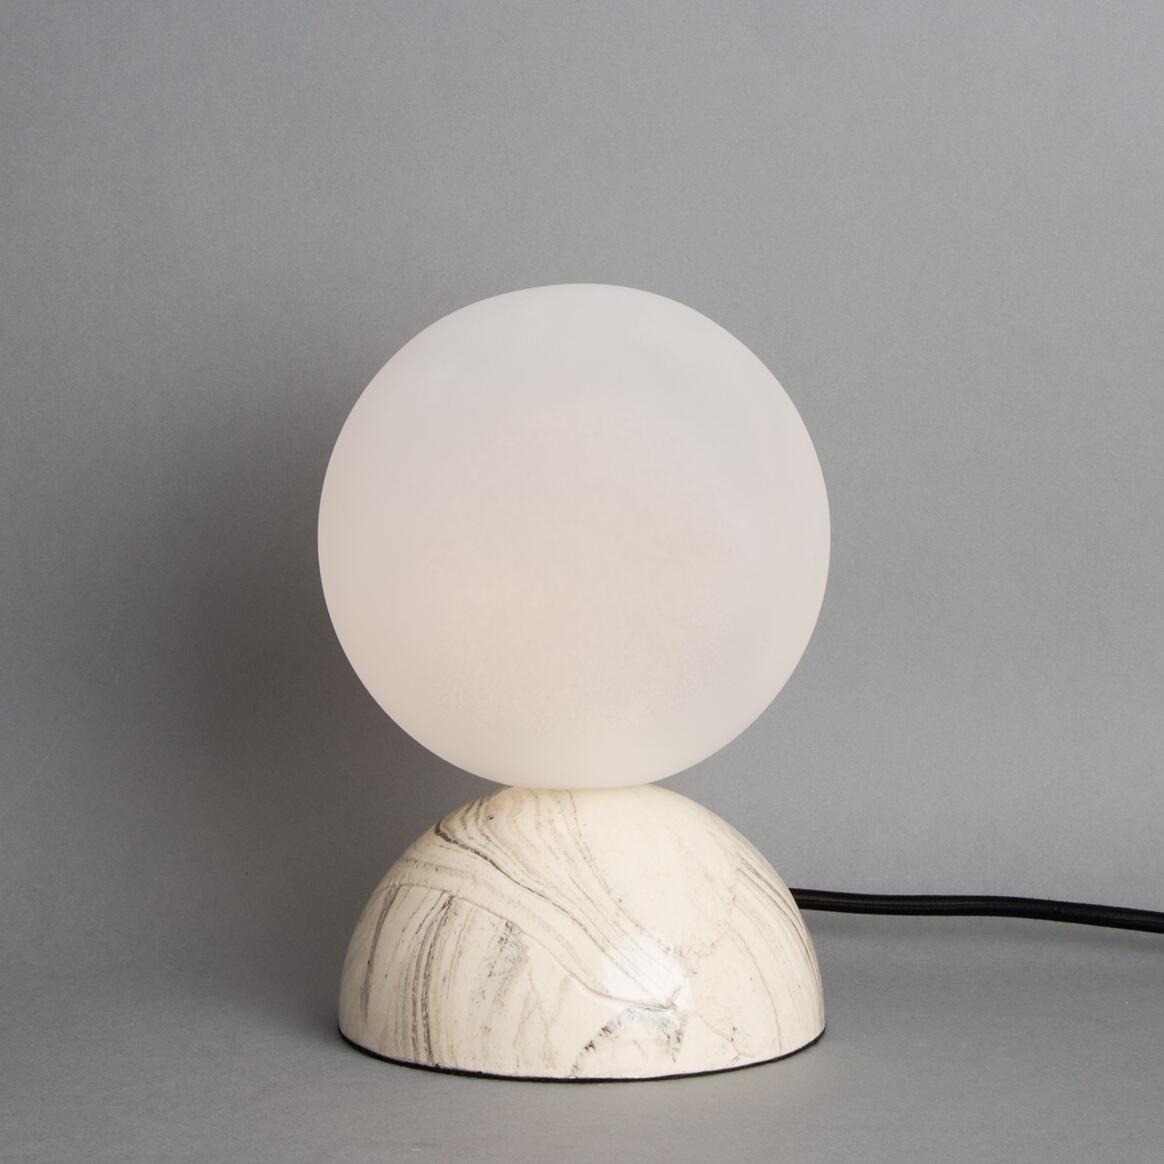 Ovata Marbled Ceramic Glass Ball Table Lamp main product image